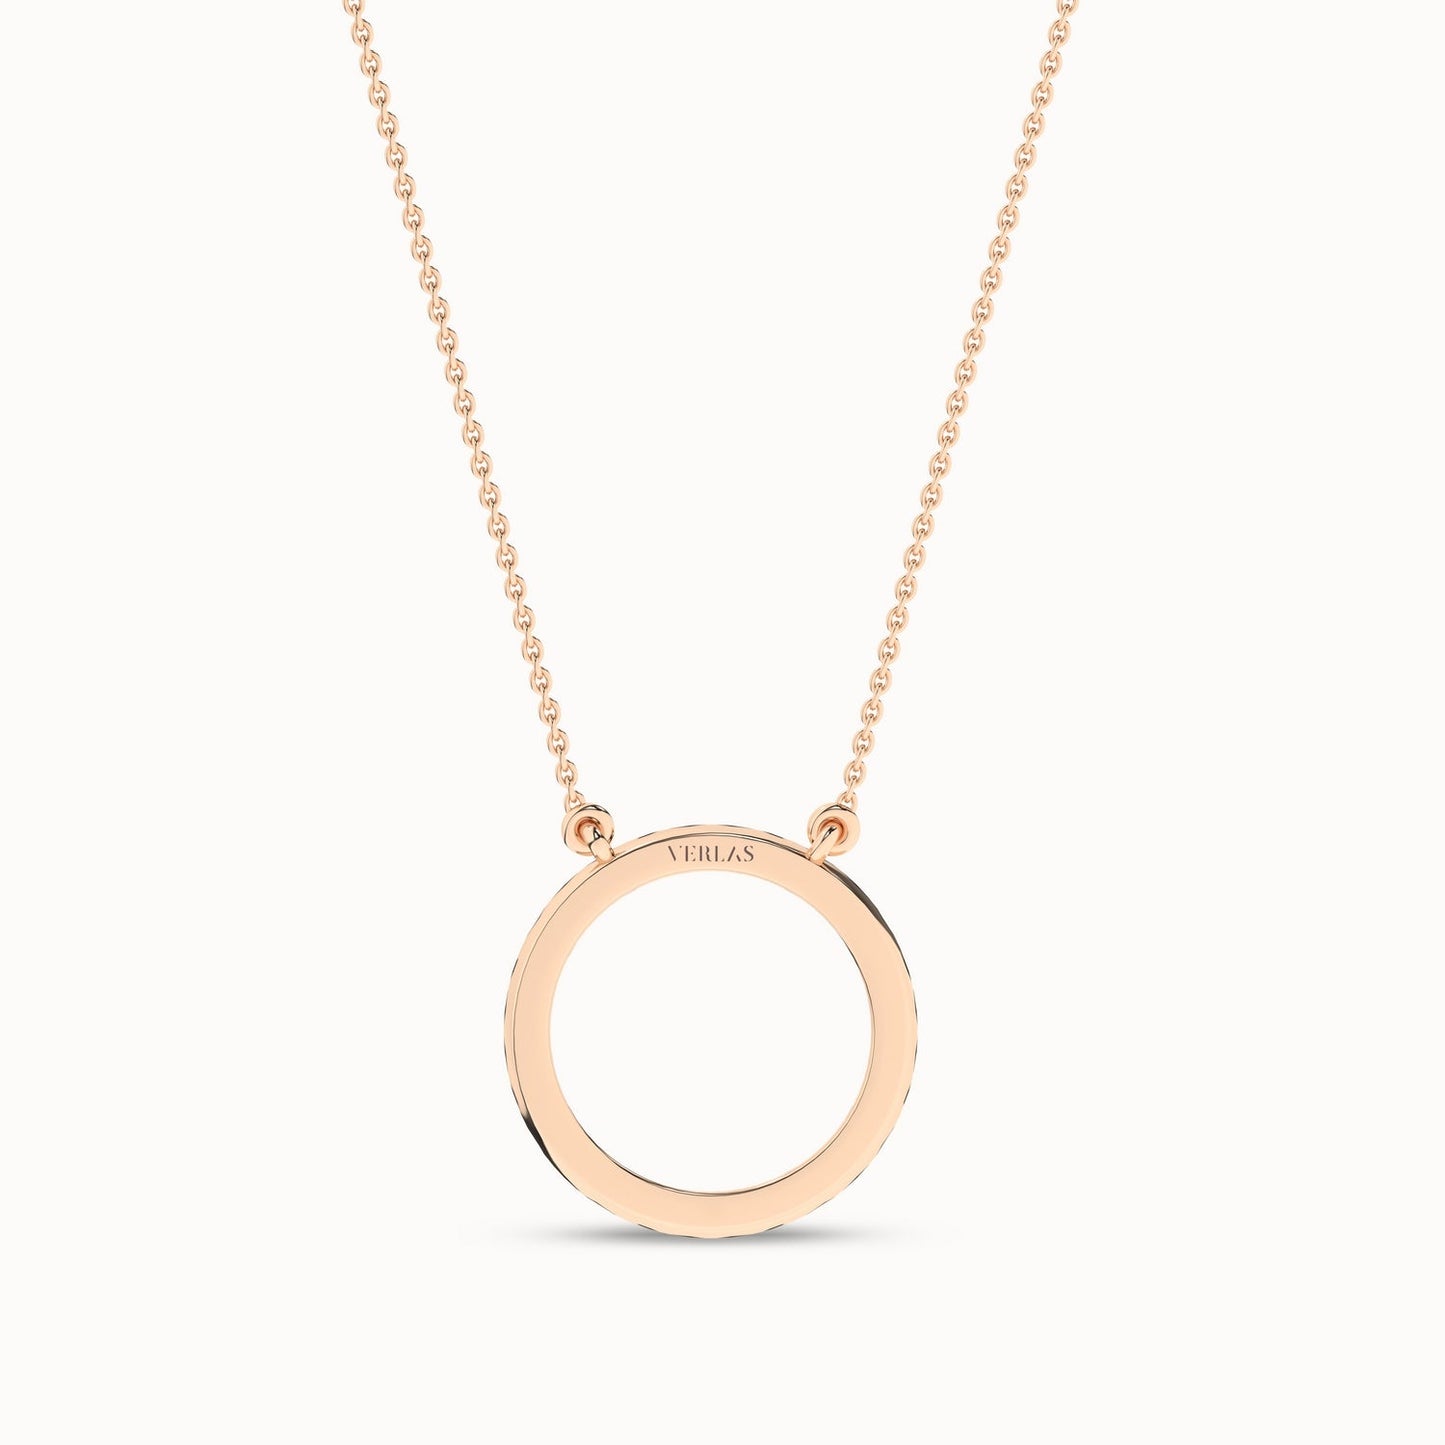 Circular Silhouette Necklace_Product Angle_1/4Ct. - 3